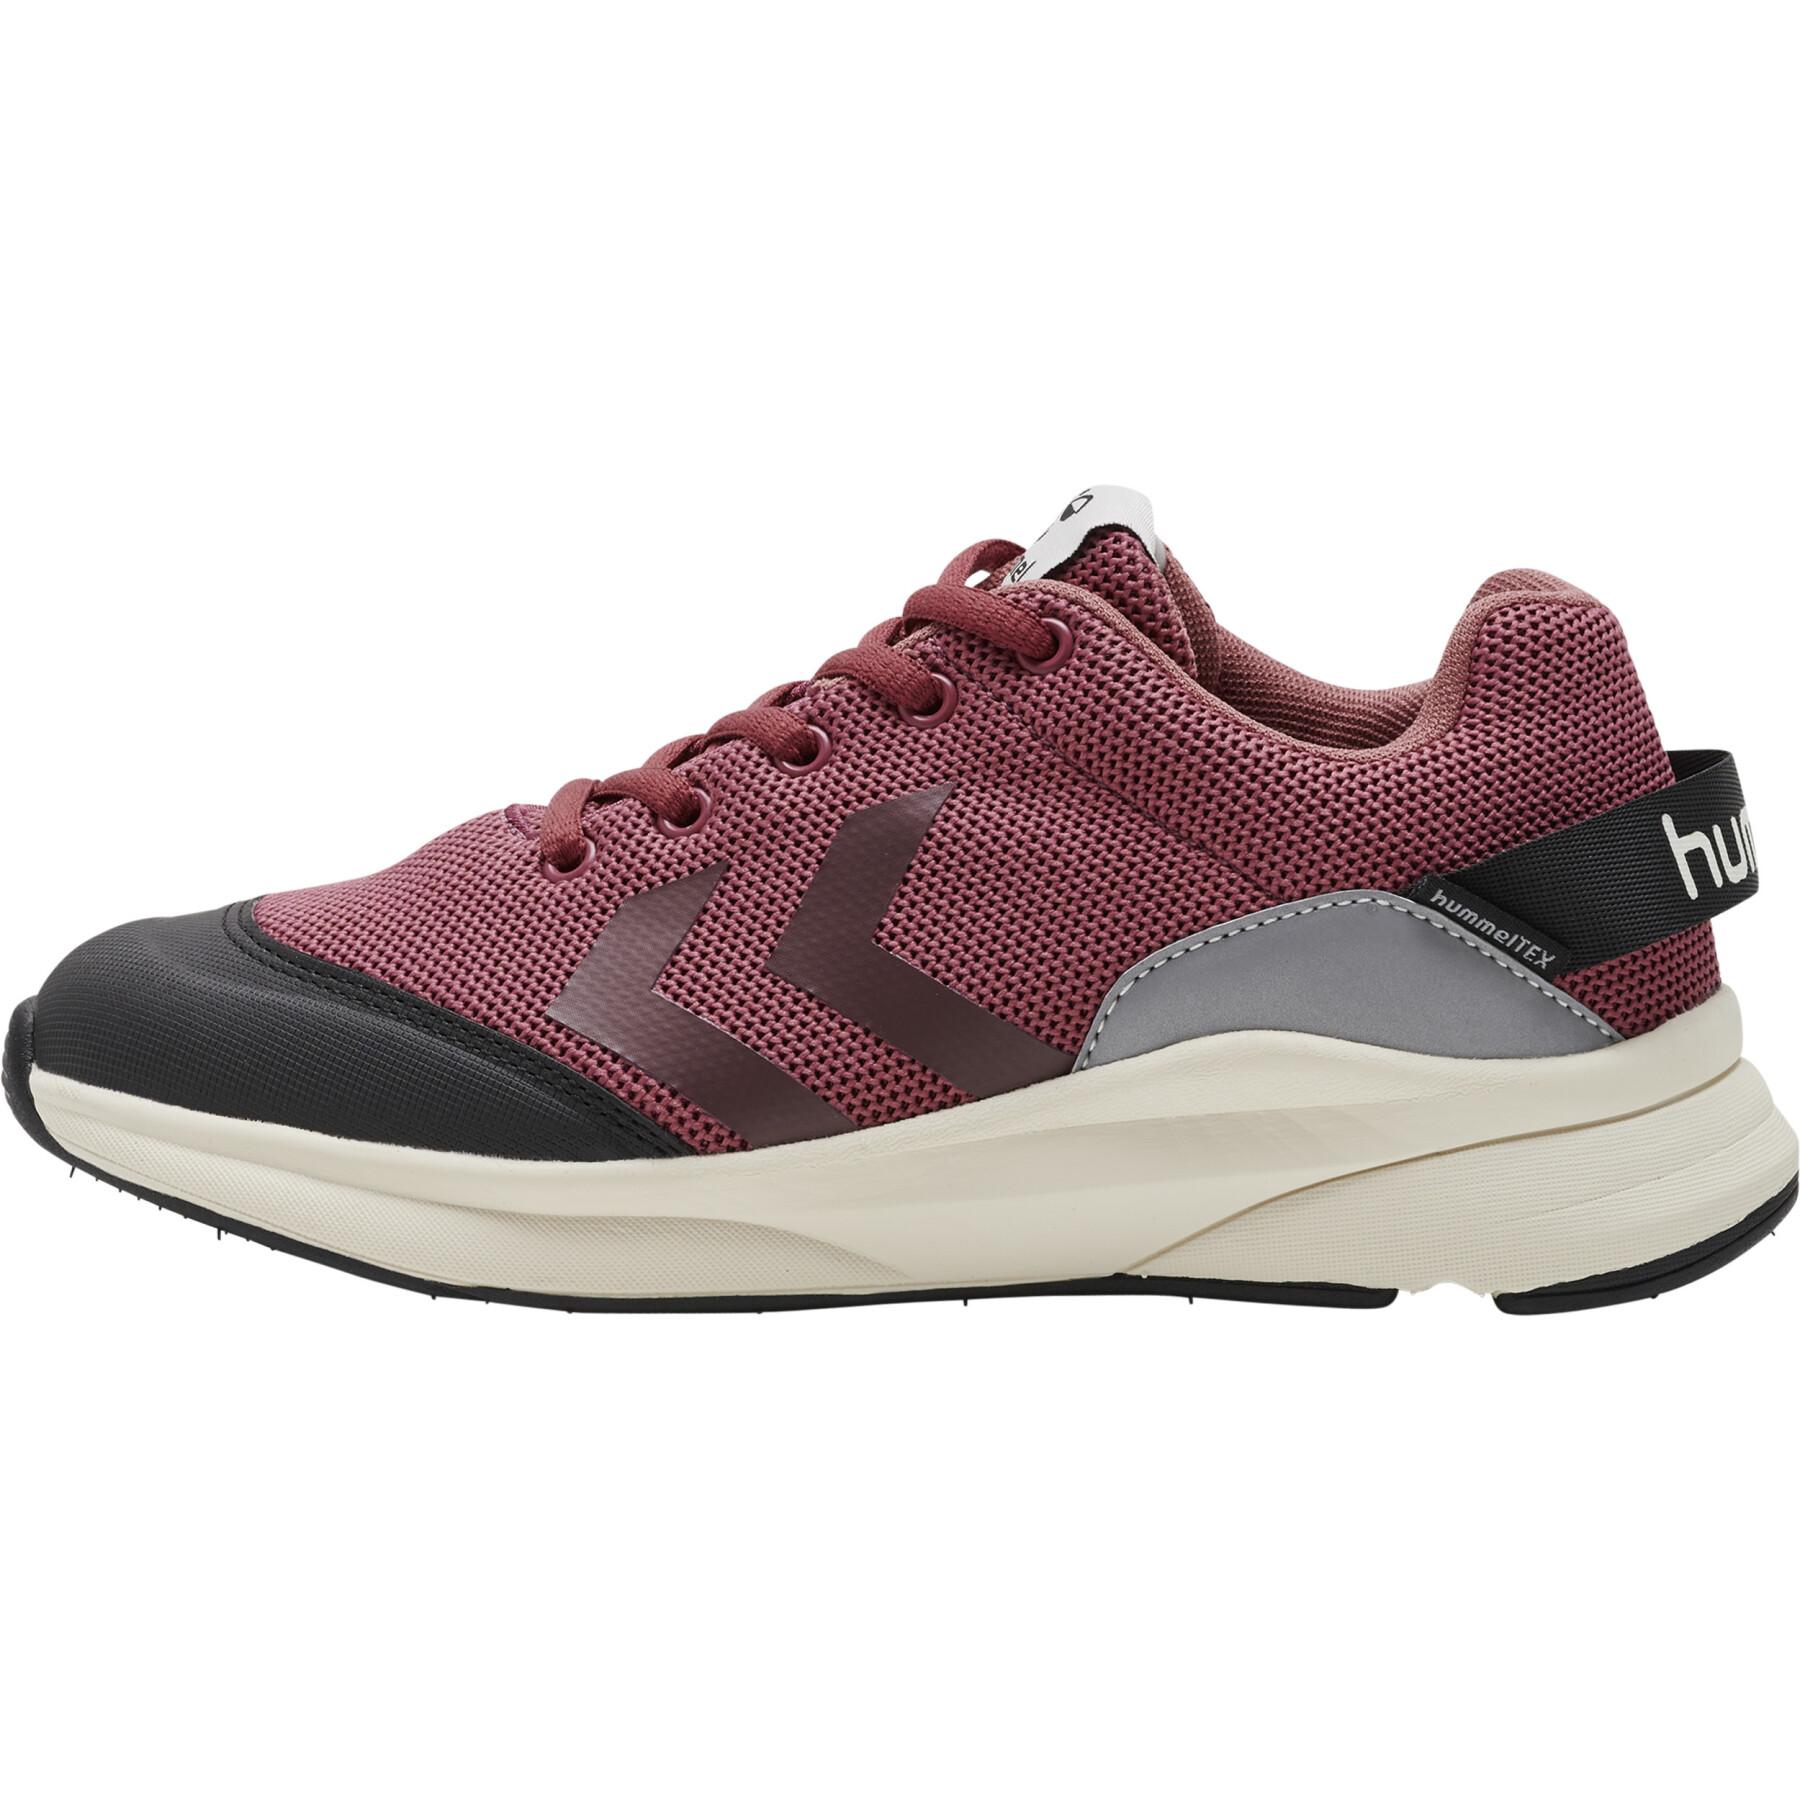 Sneakers Hummel Reach 250 Recycled Tex